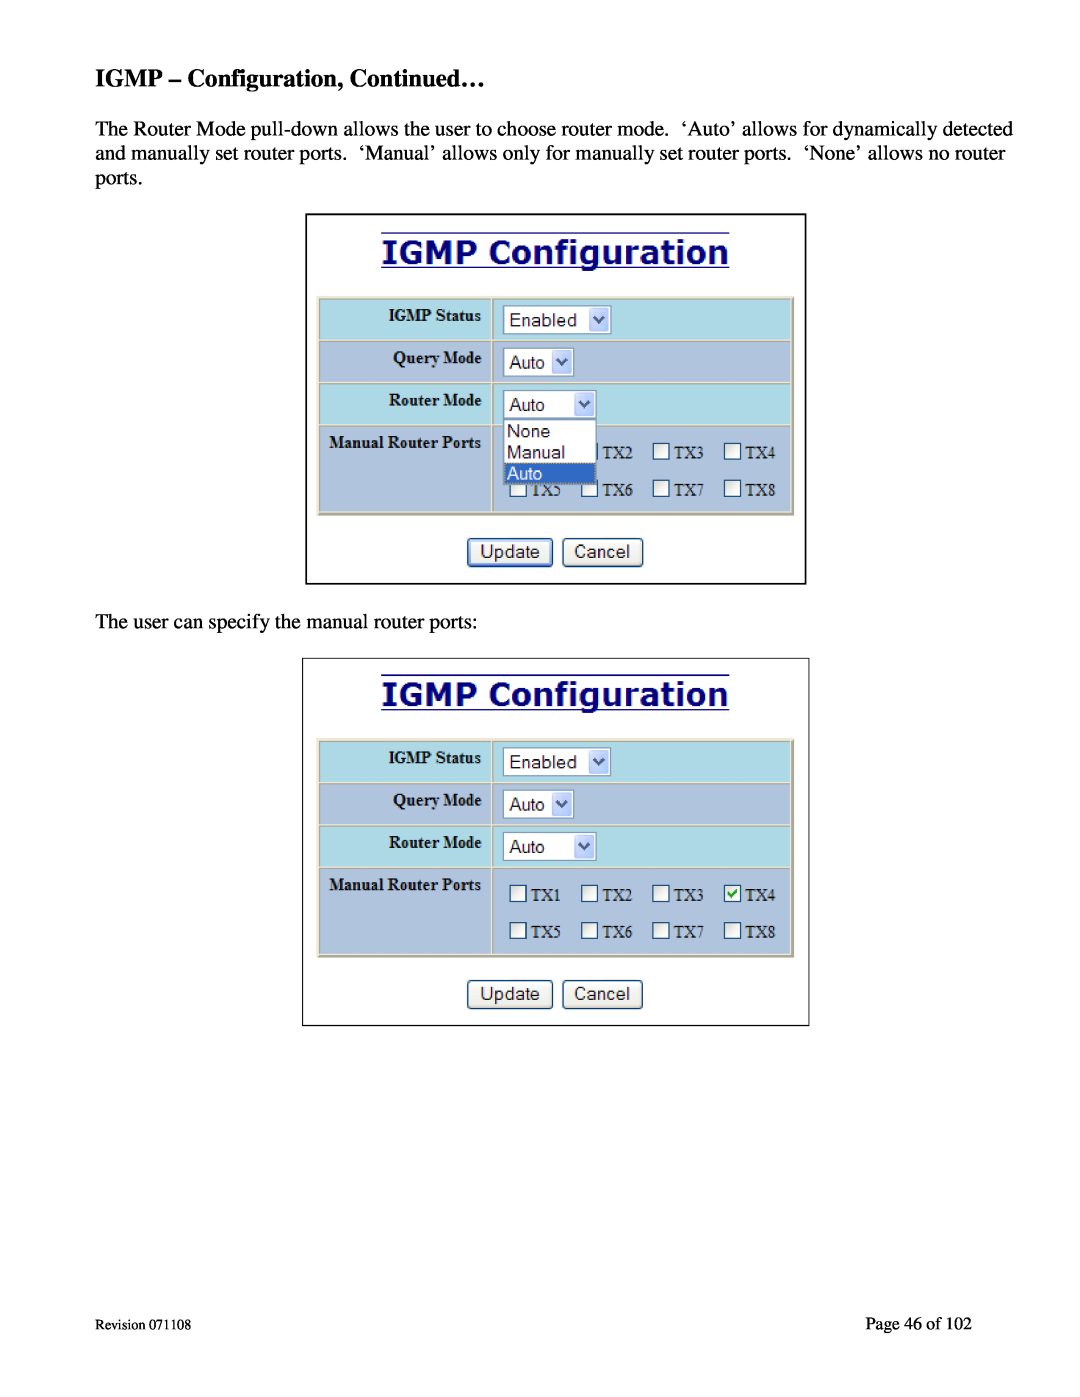 N-Tron 708M12 IGMP - Configuration, Continued…, The user can specify the manual router ports, Page 46 of, Revision 